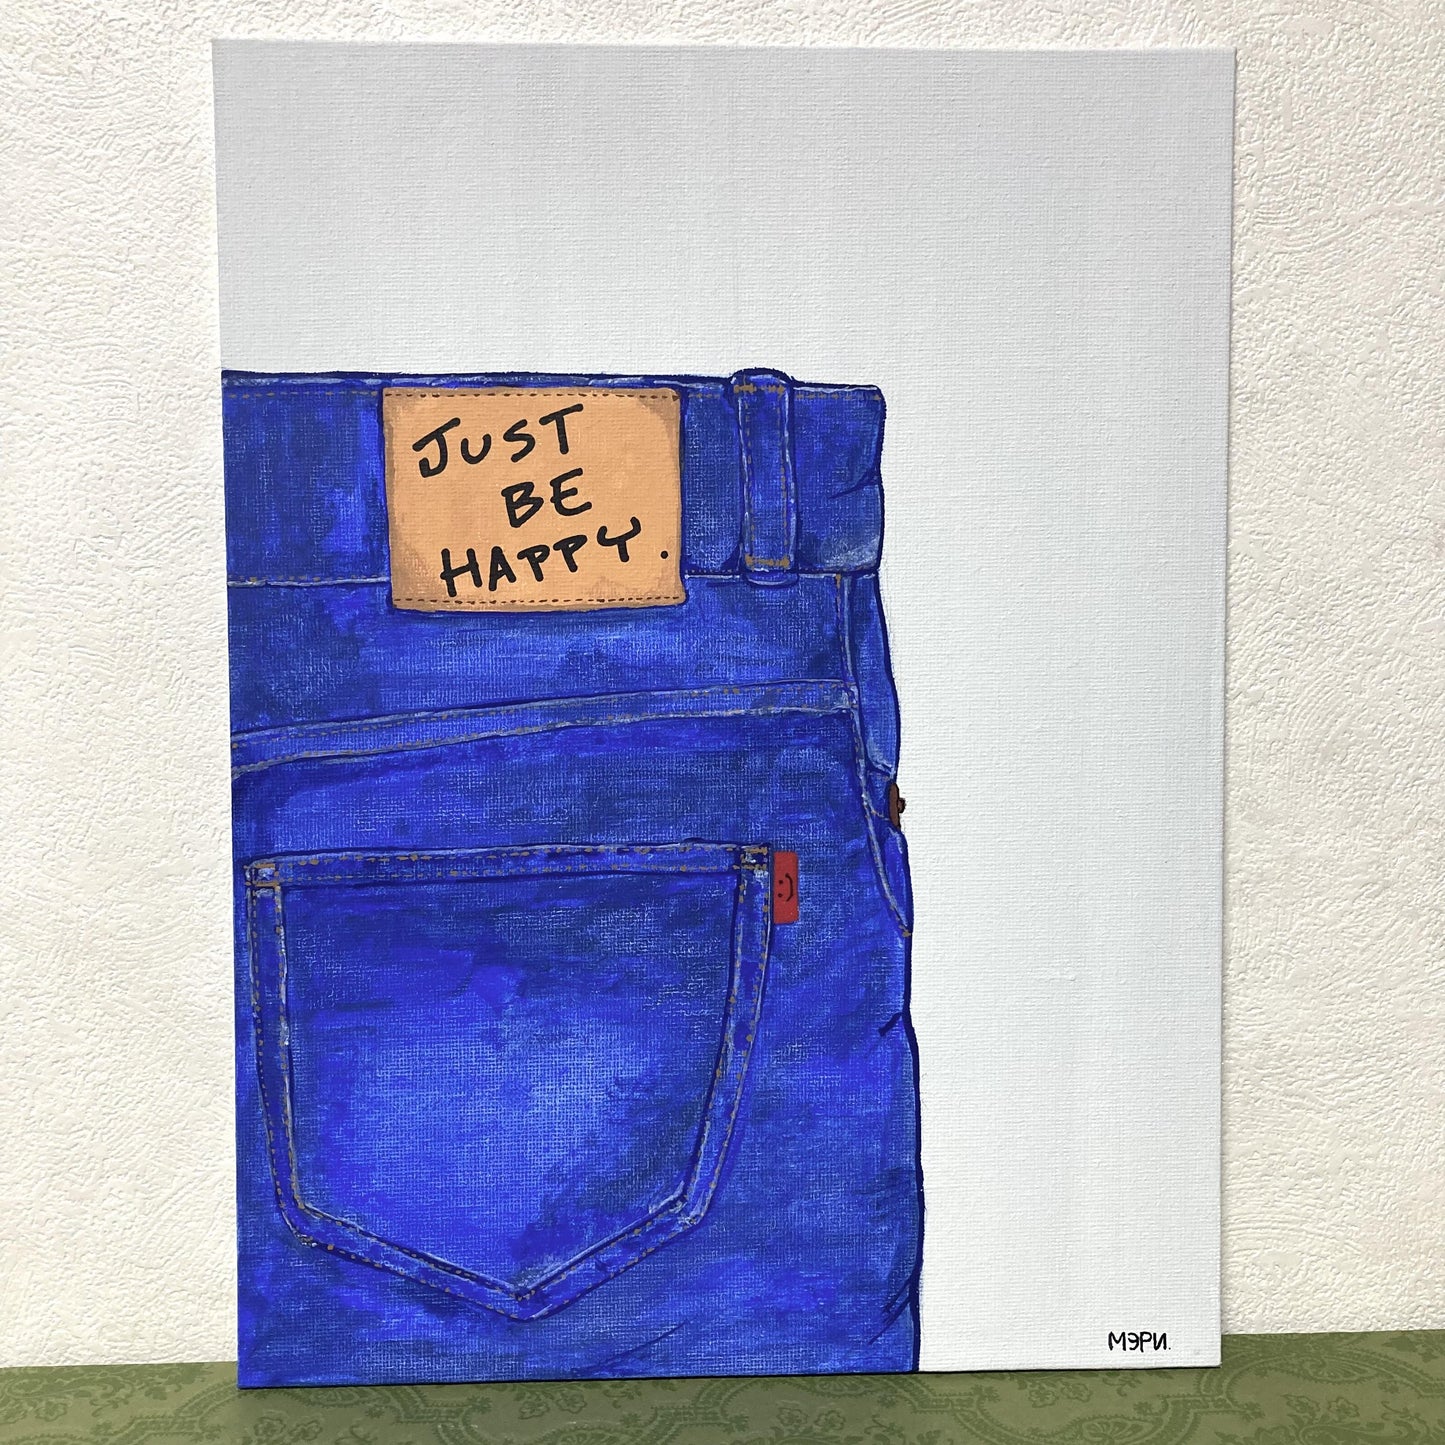 Just Be Happy. - FROM ARTIST